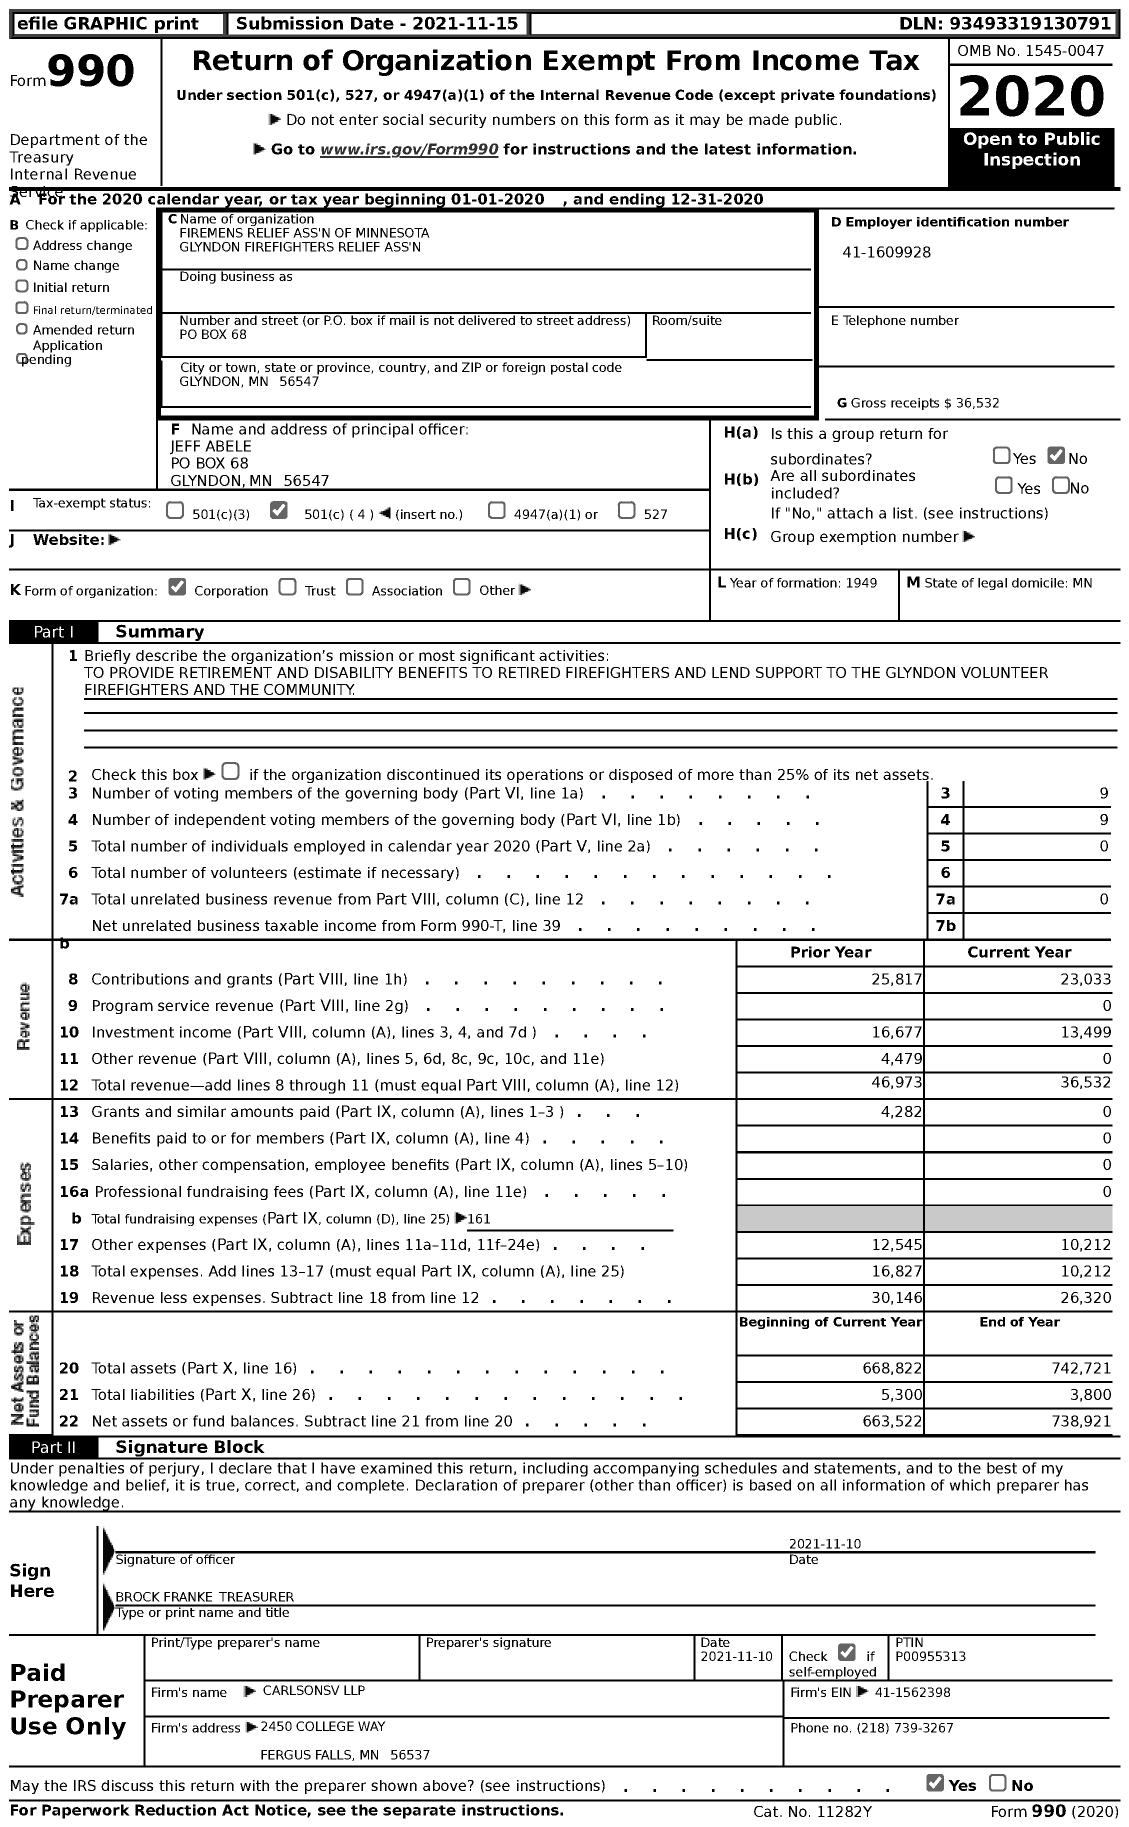 Image of first page of 2020 Form 990 for Firemens Relief Ass'n of Minnesota Glyndon Firefighters Relief Association